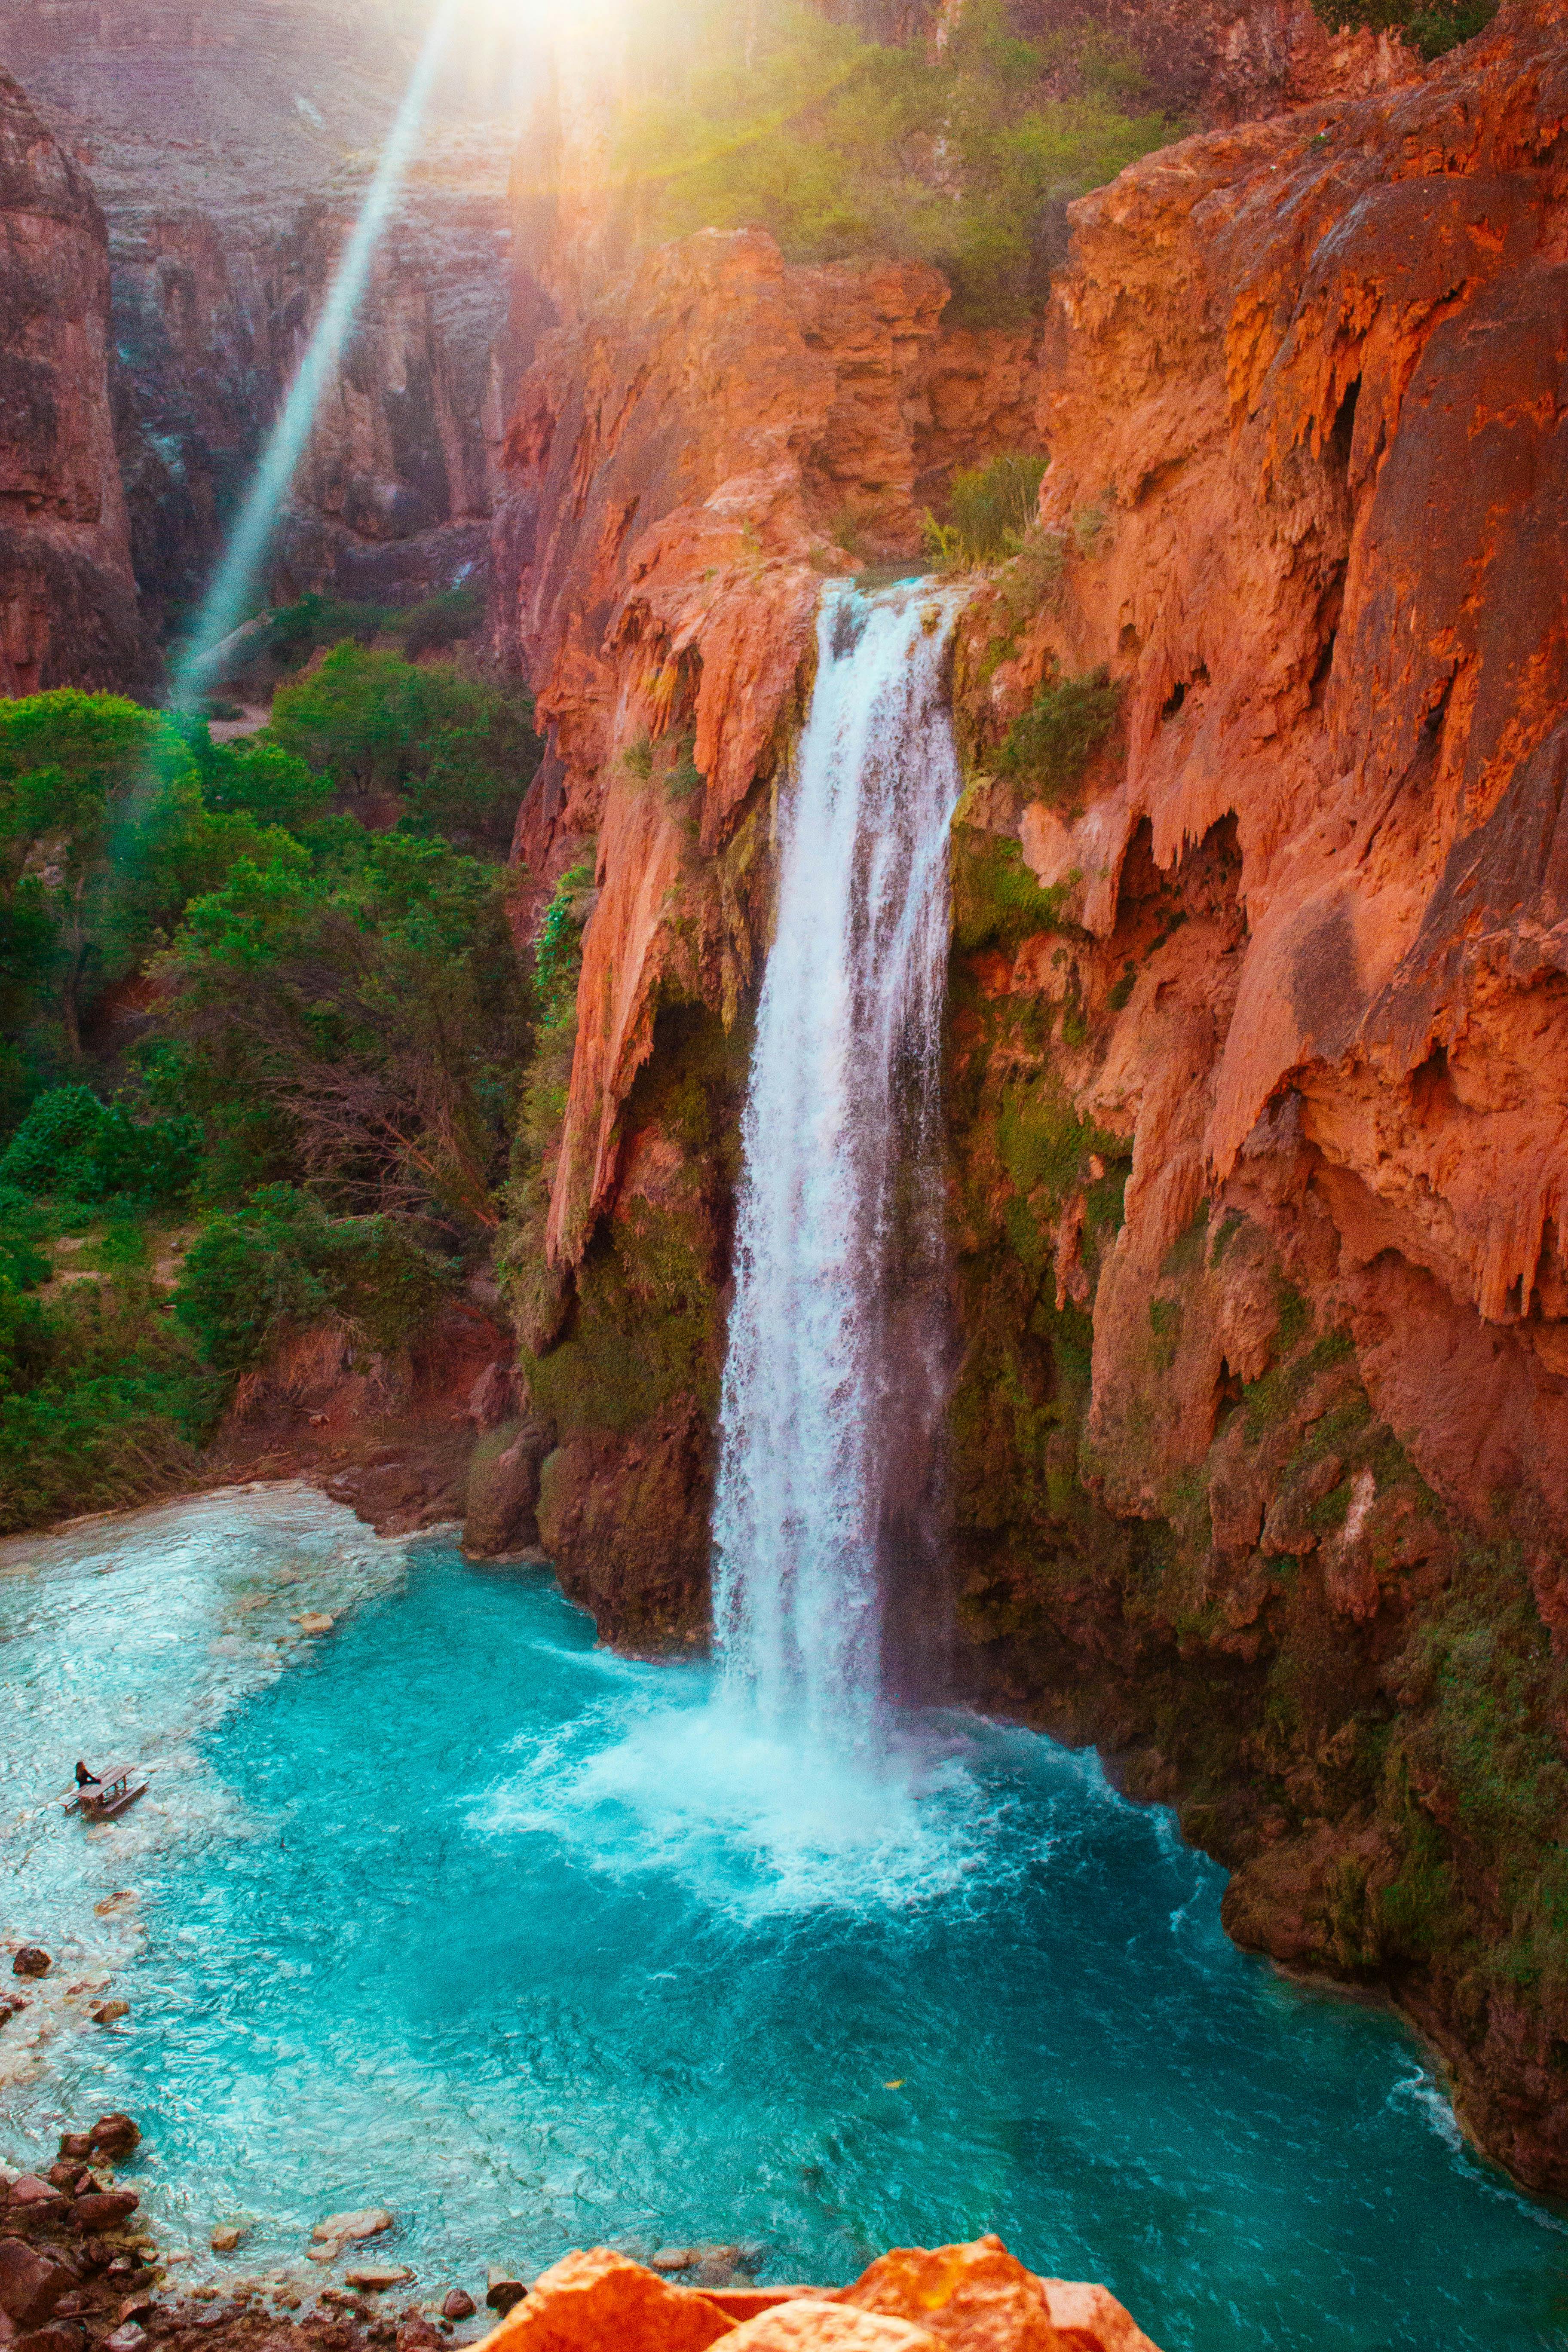 A waterfall descends over red rocks into a blue pool